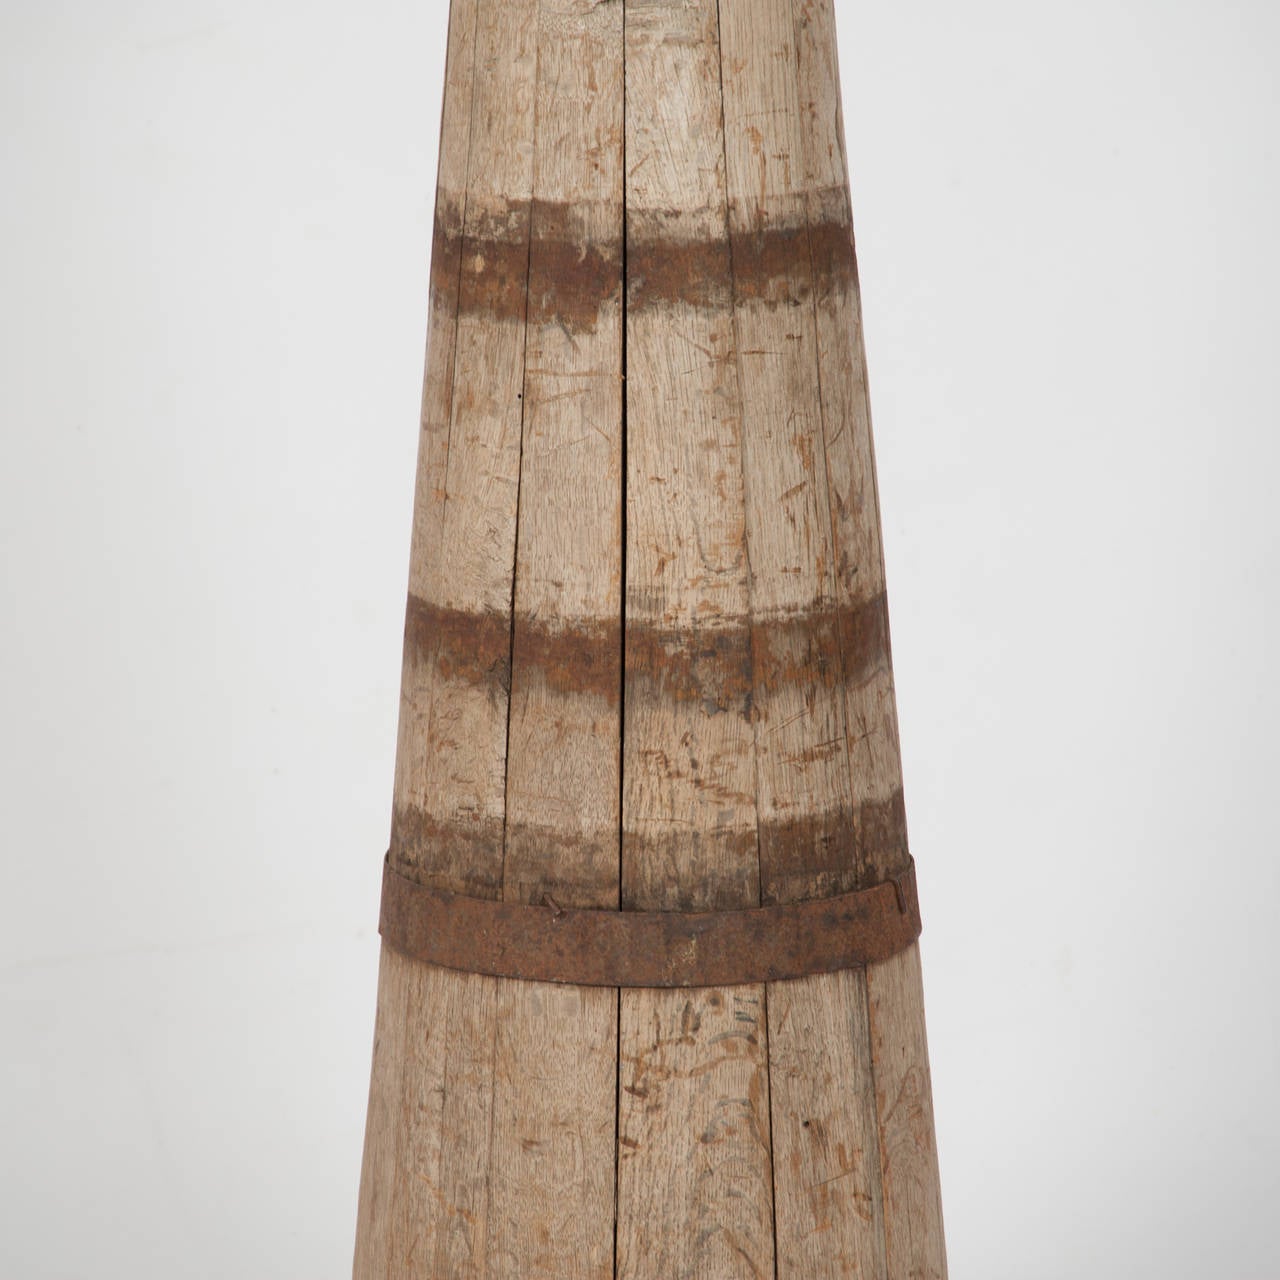 19th Century Dutch Coopers-Made Barrel Butter Churn, Now Electrified as a Lamp For Sale 2